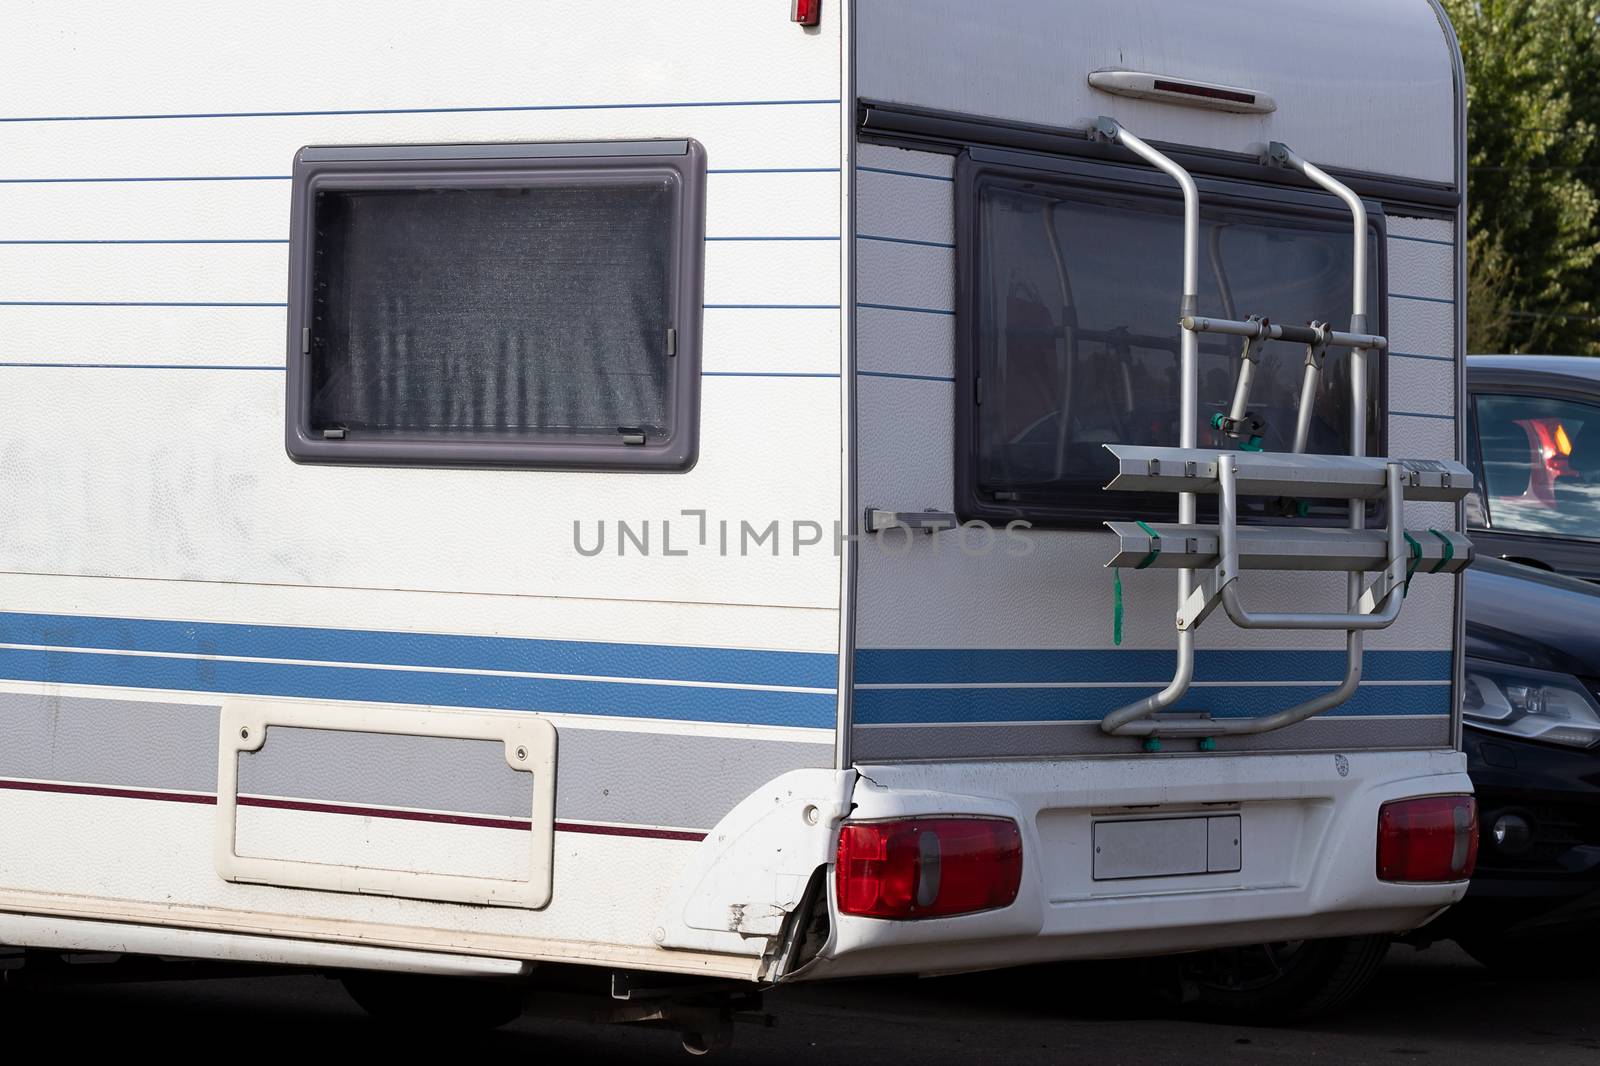 Caravan trailer, mobile home for family travel, close-up. Camping concept, hyper-local travel, family outings.